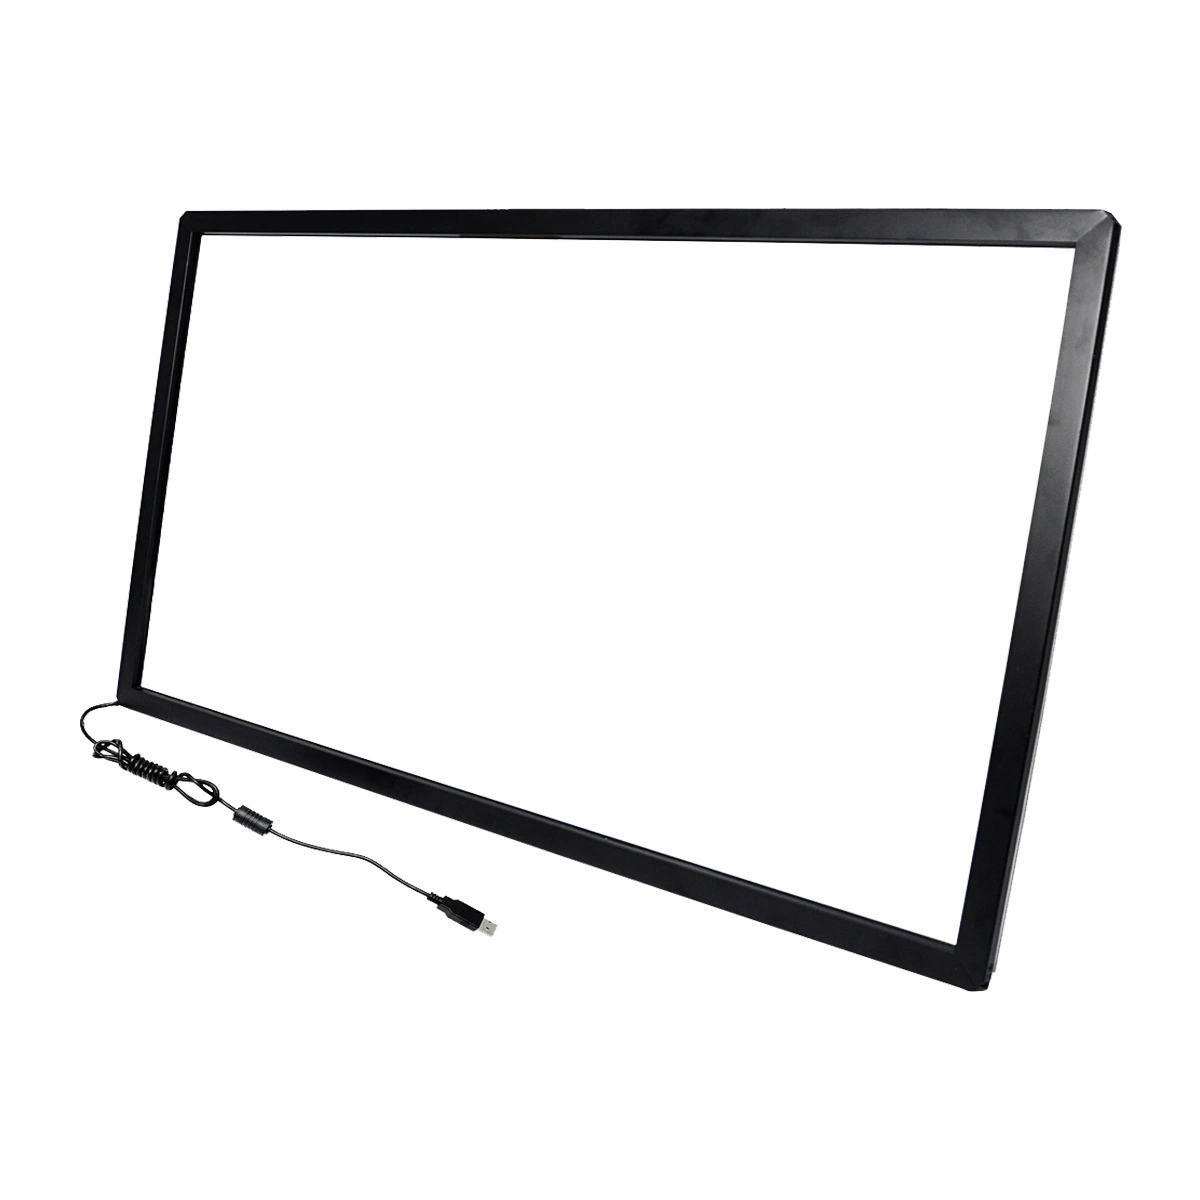 55 Inch Infrared Multi Touch Screen Frame IR Multi Touch Overlay for Windows